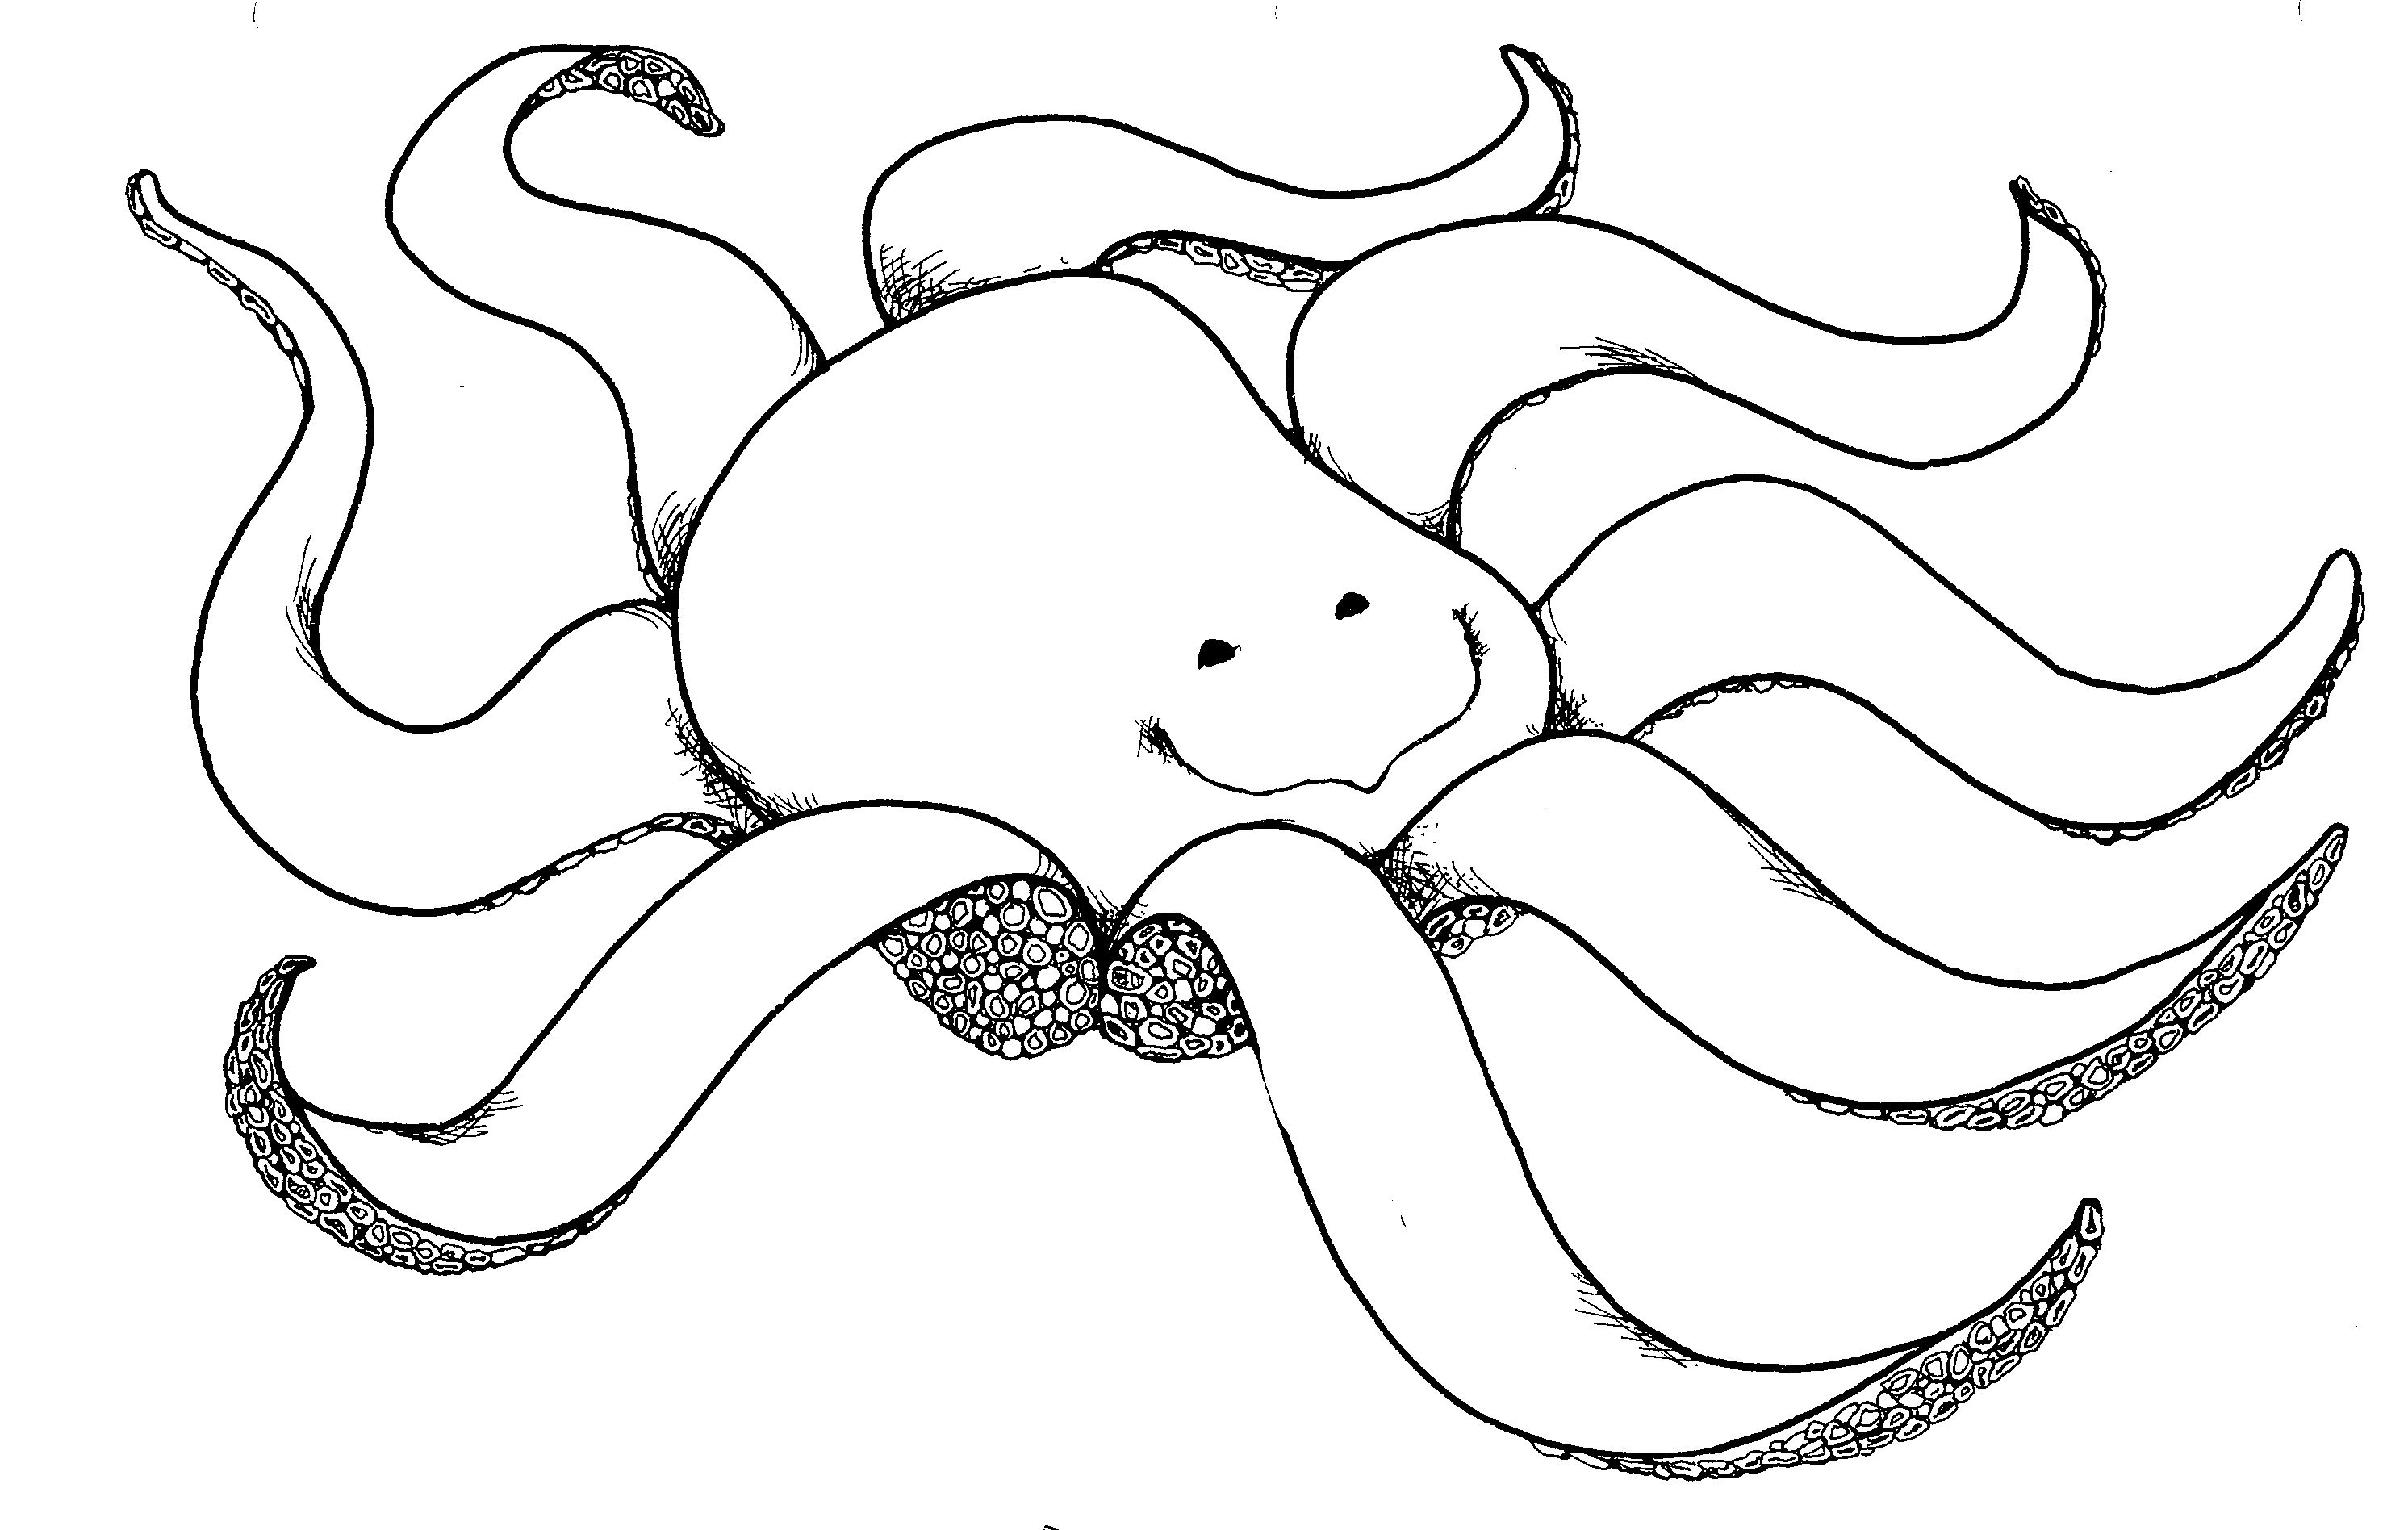 Octopus Outline Coloring Pages octopus Printable Coloring4free